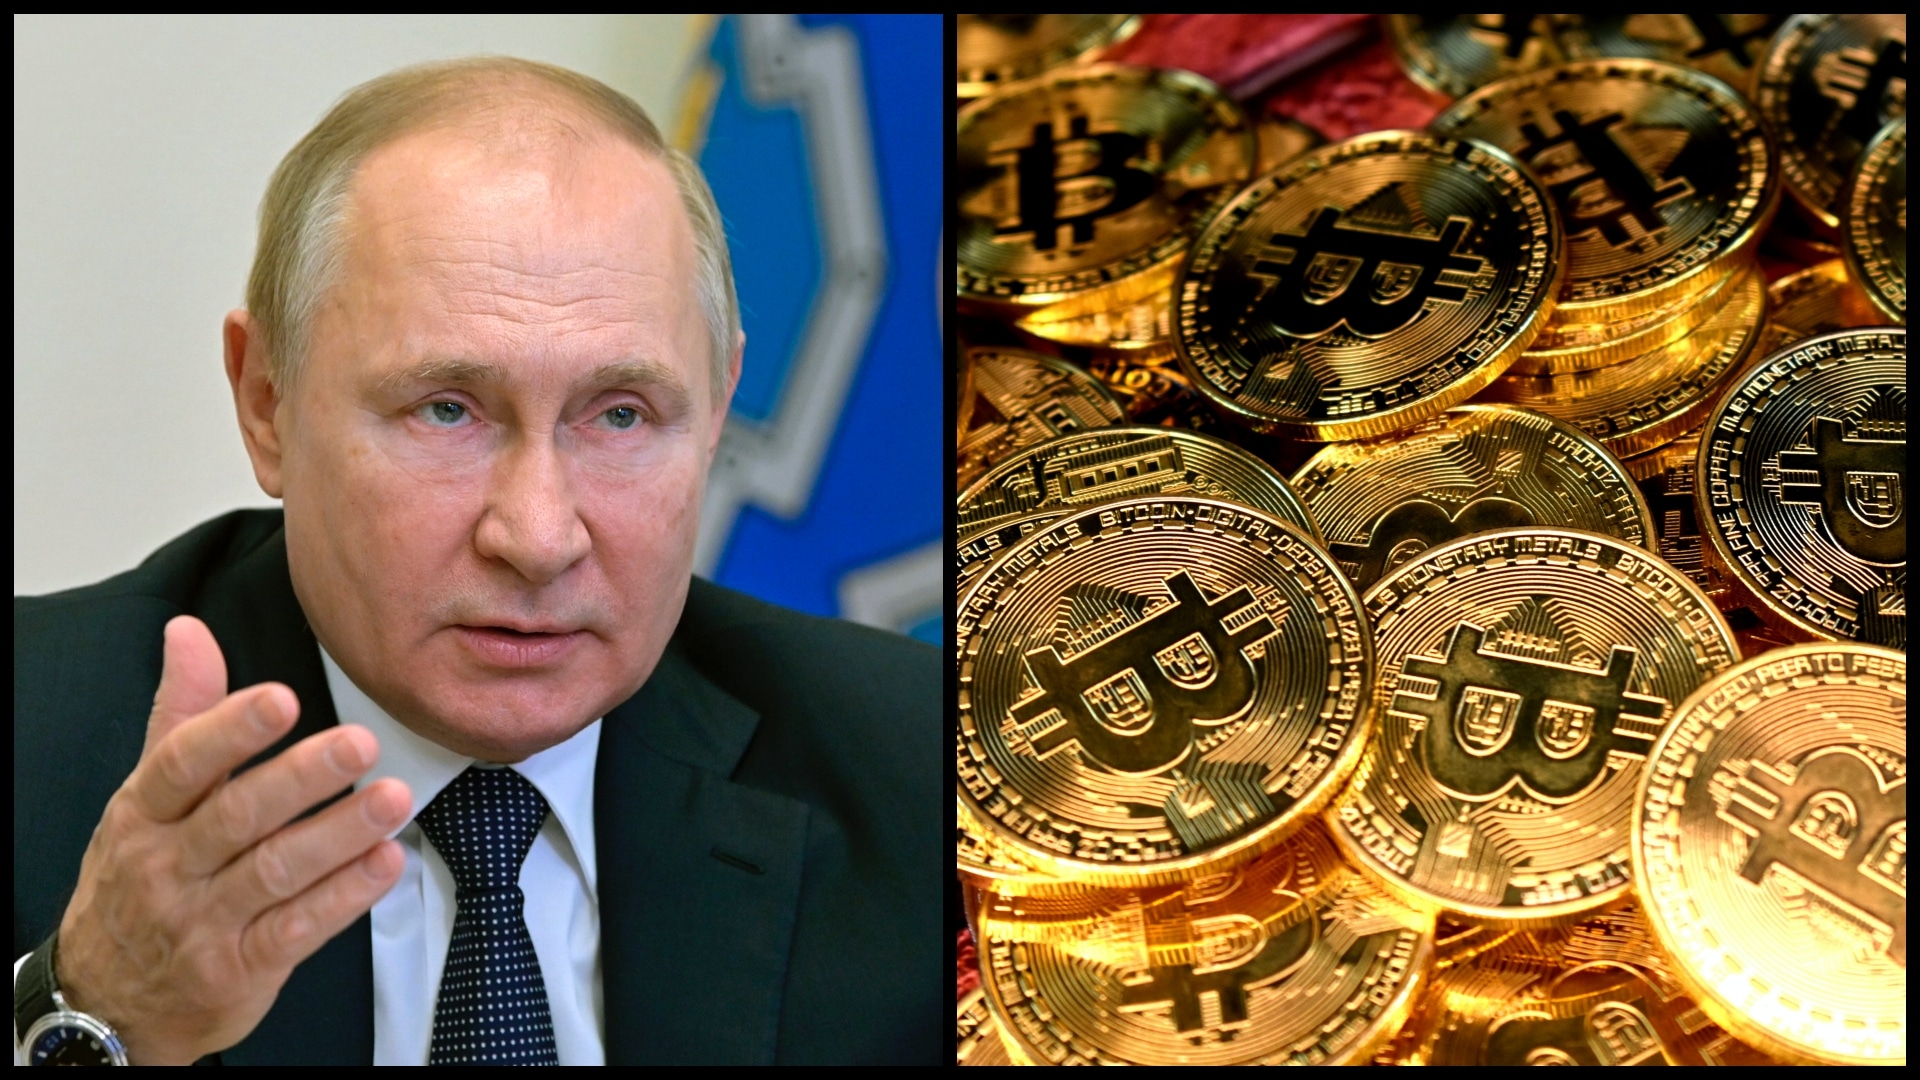 Russia's financial rescue plan has collapsed, and the EU wants harsh sanctions on cryptocurrencies